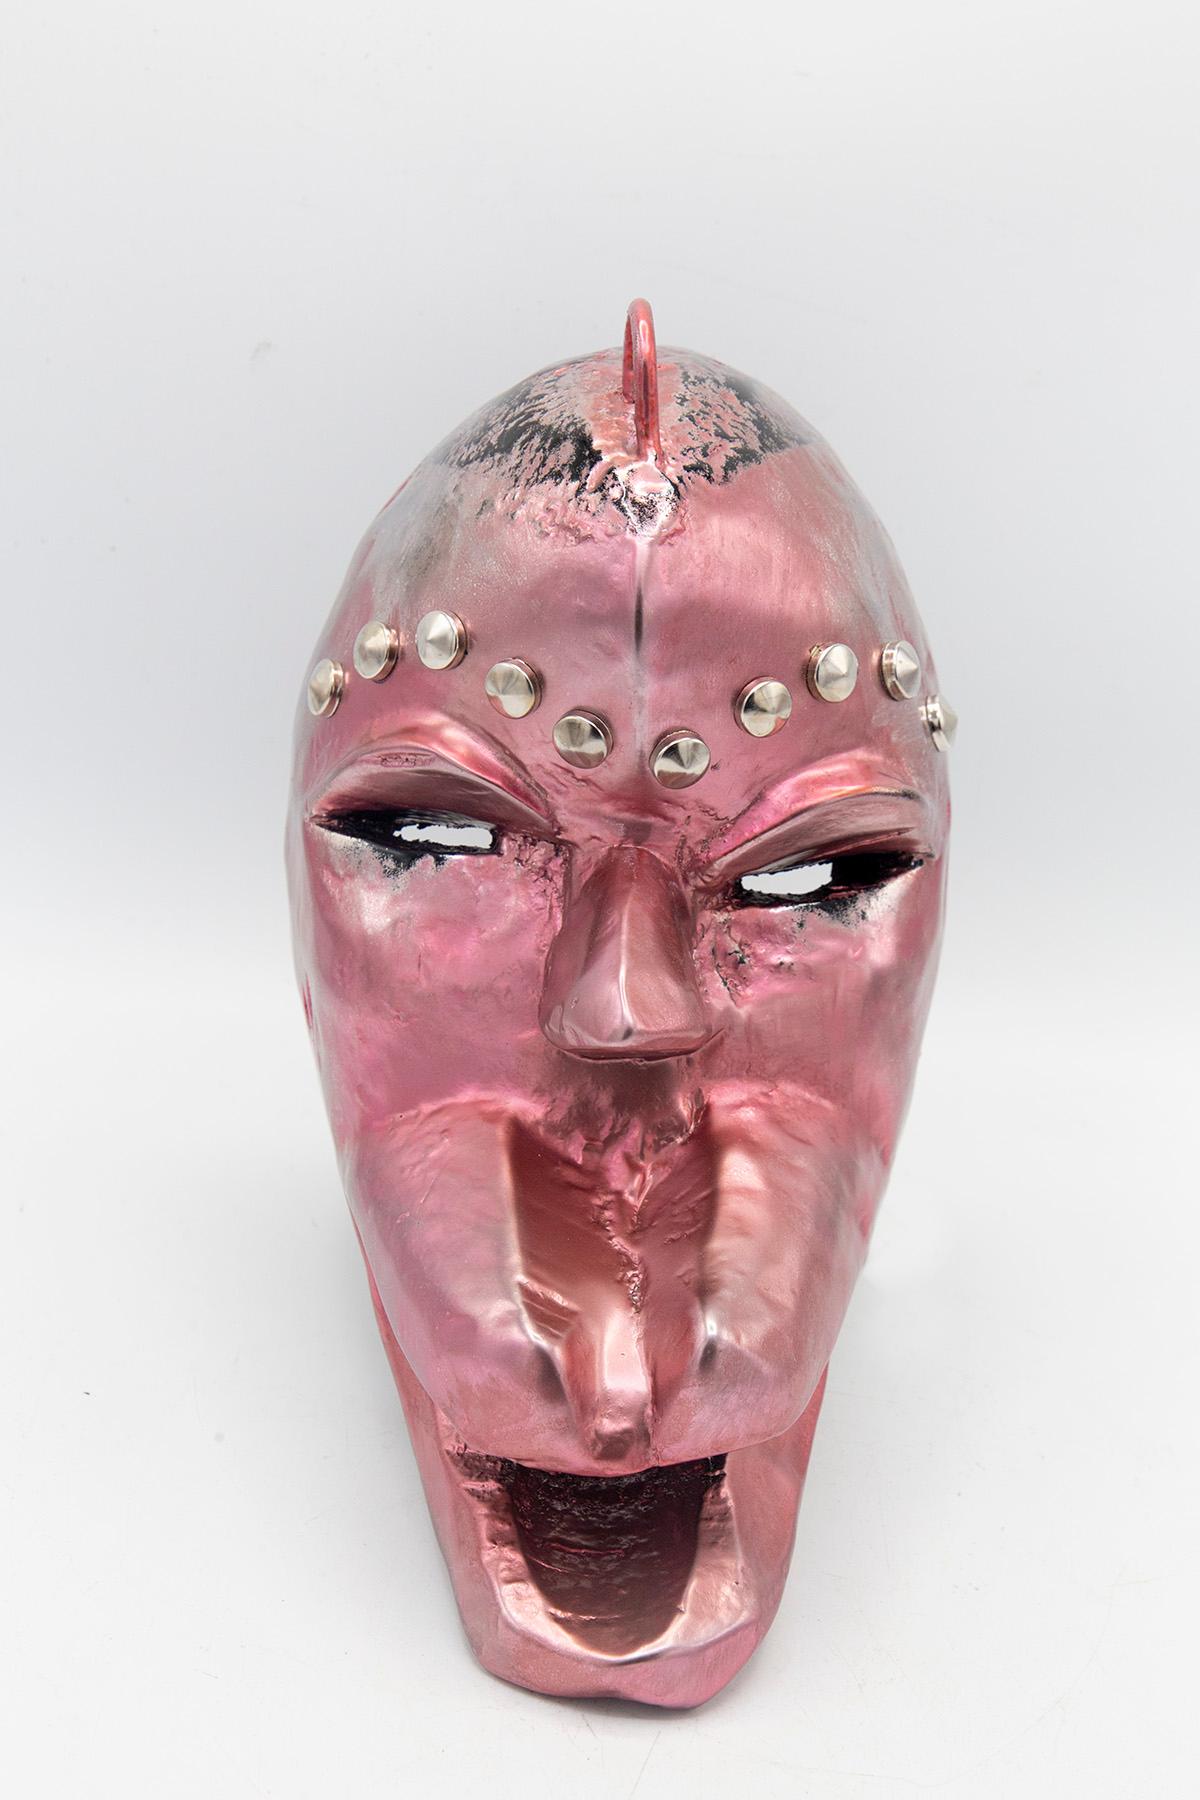 Unique African mask created by the artist Bomber Bax.
The mask dates back to the early 1900s and was subsequently worked on and painted in late 2022 by the artist.
The artist used special metallic paints to evoke a lunar effect and draw attention